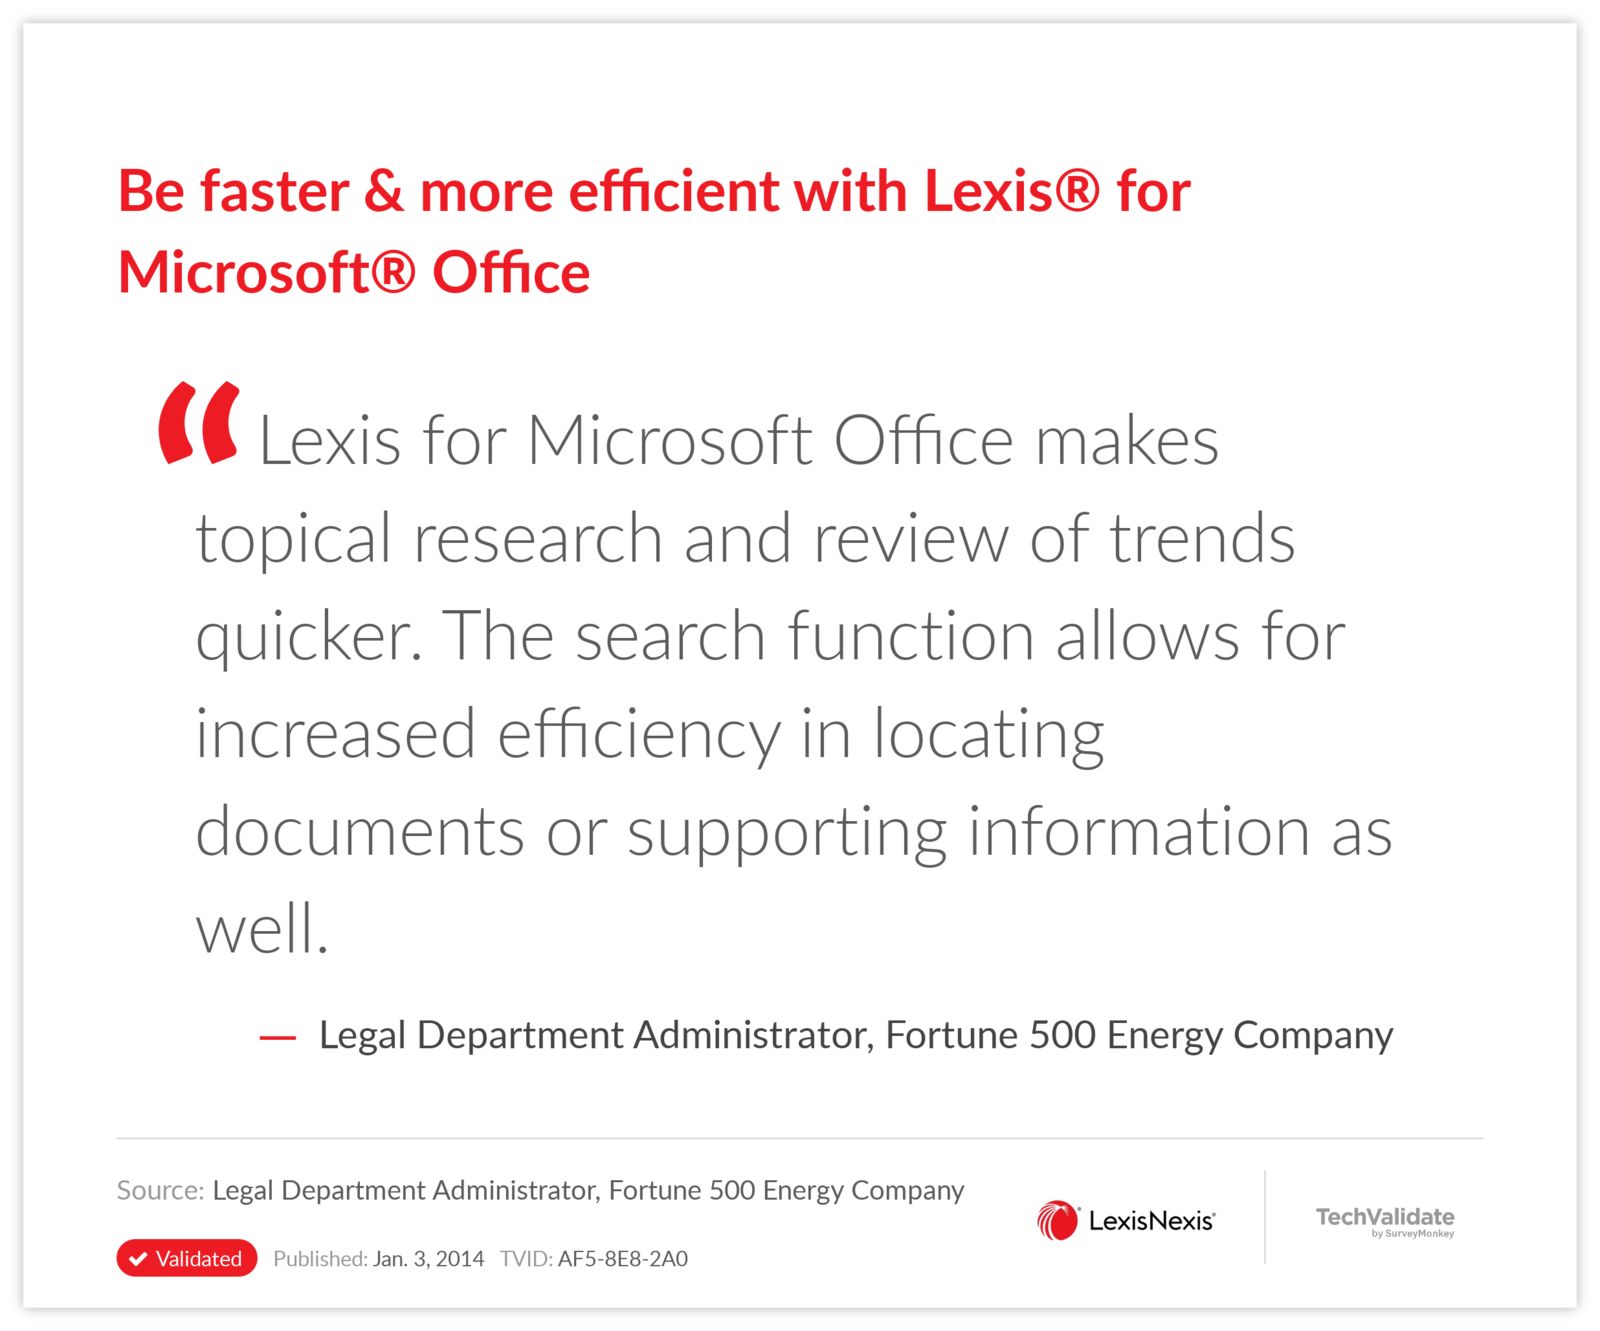 Be faster & more efficient with Lexis® for Microsoft® Office